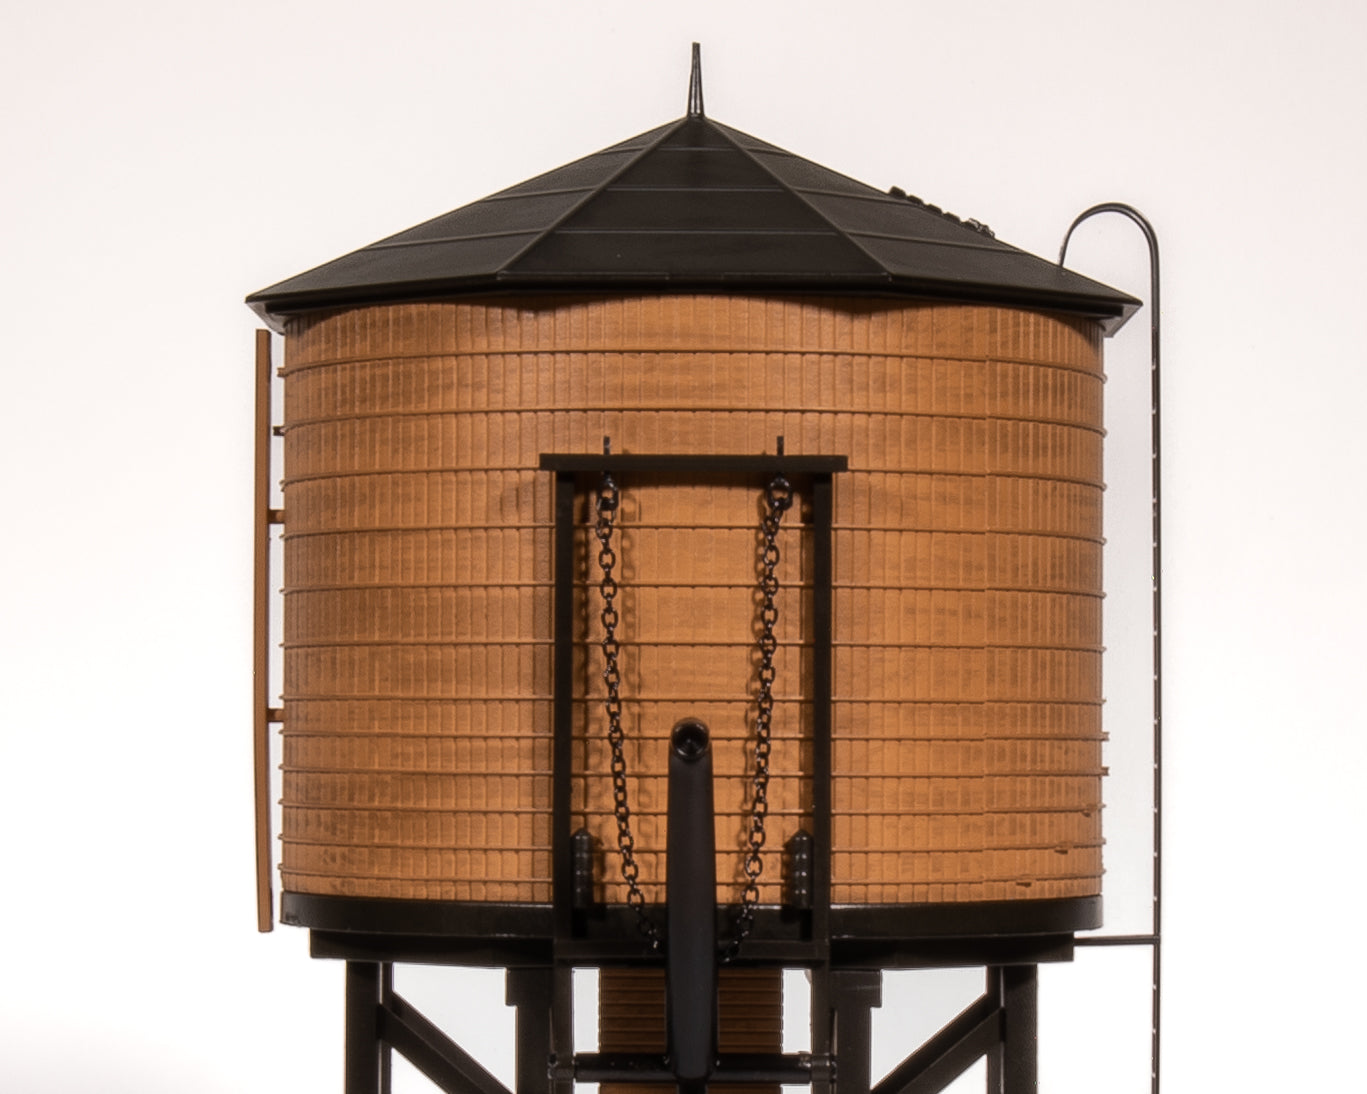 7925 Operating Water Tower w/ Sound, WP, Weathered, HO Default Title